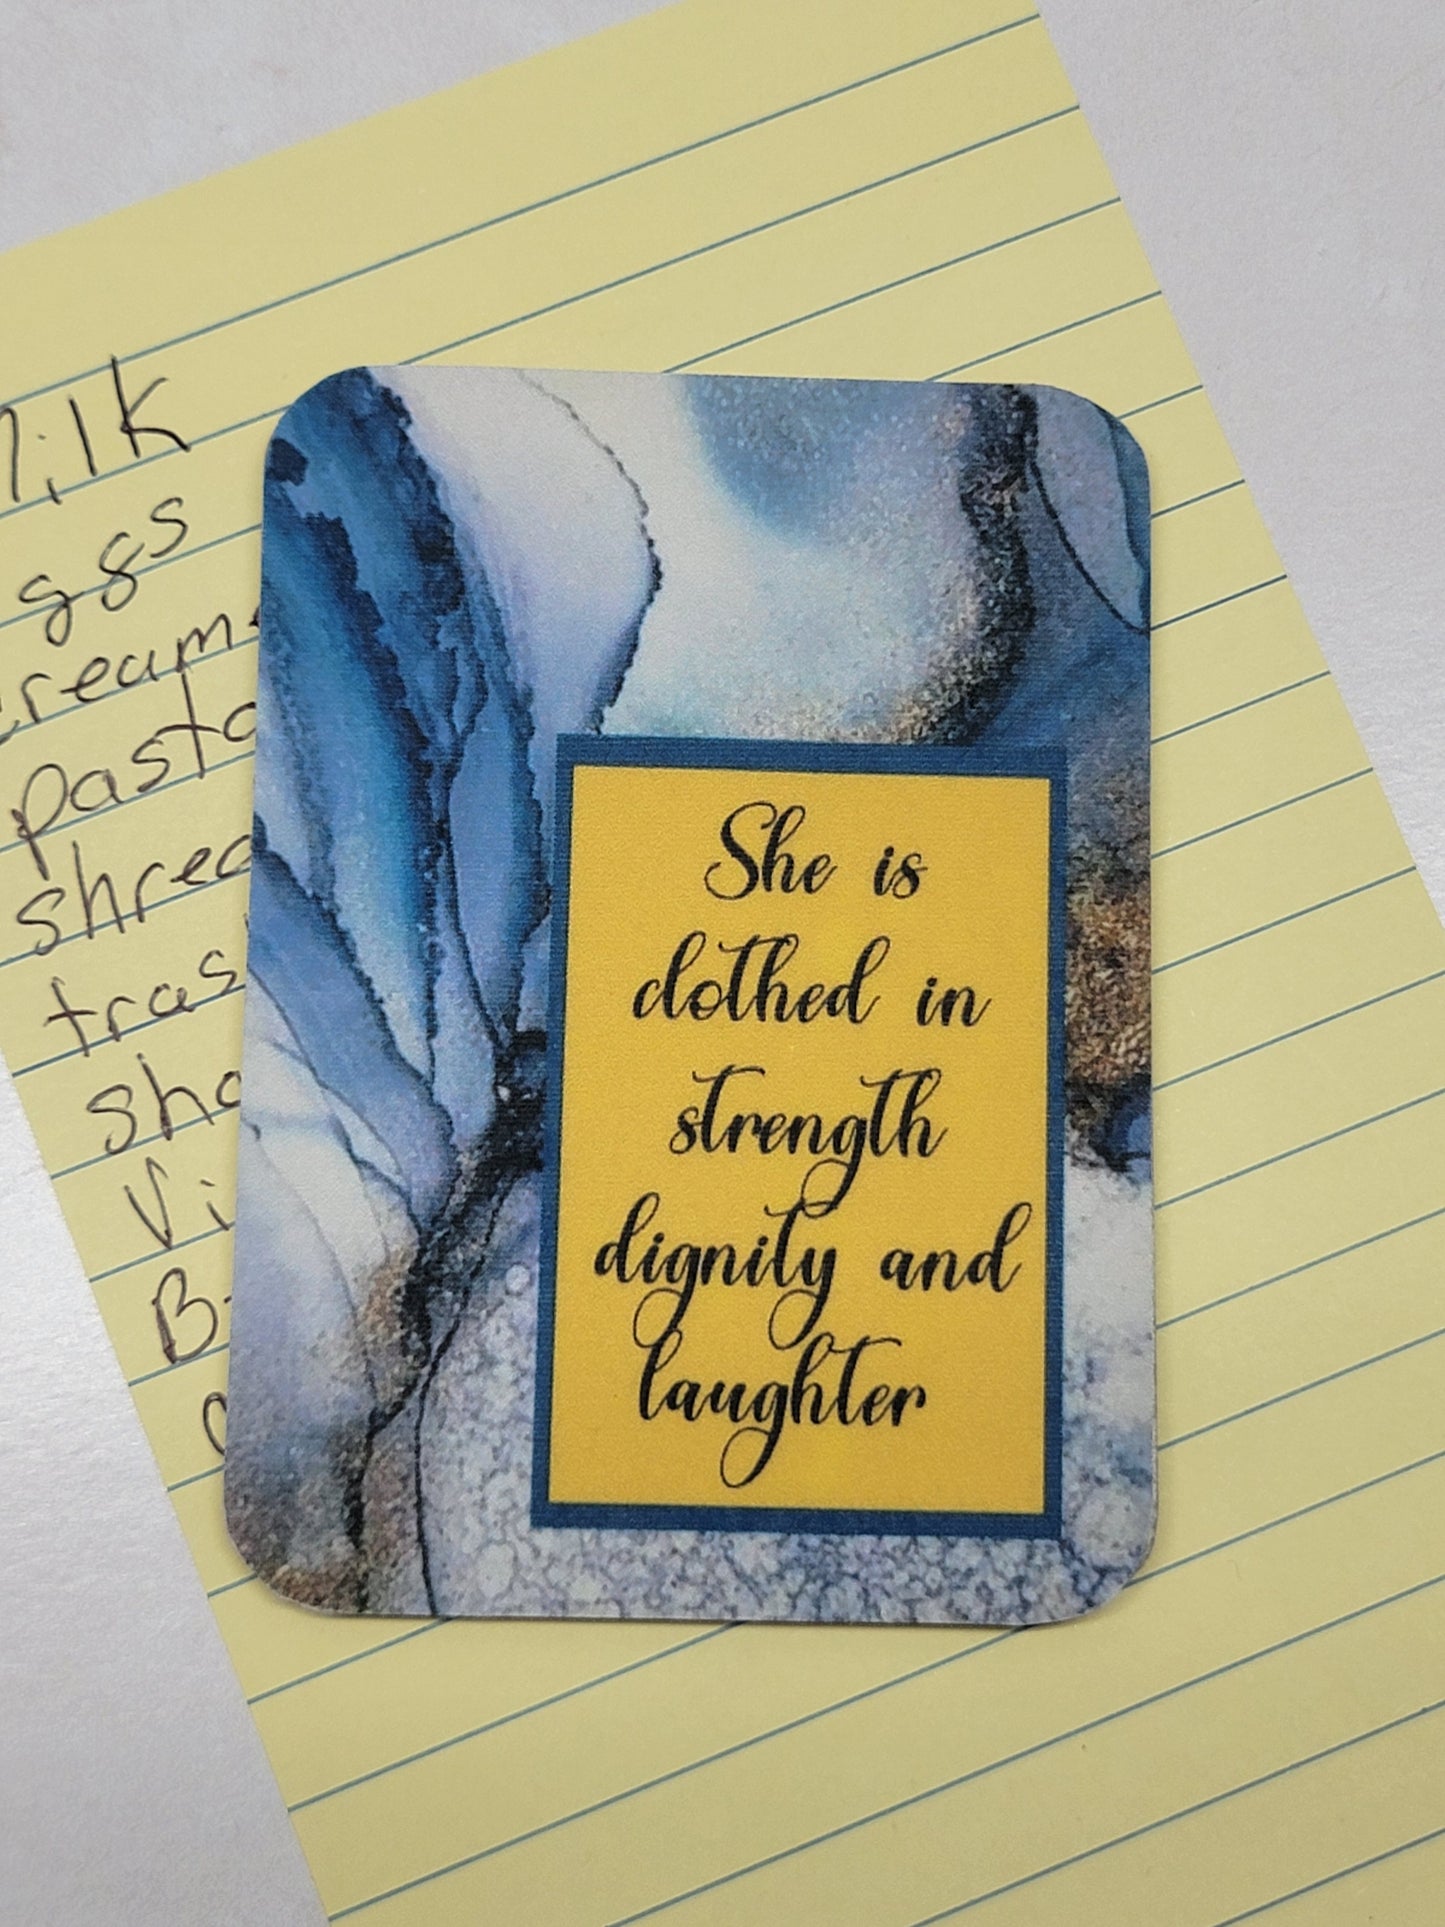 She is clothed in strength - Digital Art Magnet - 2